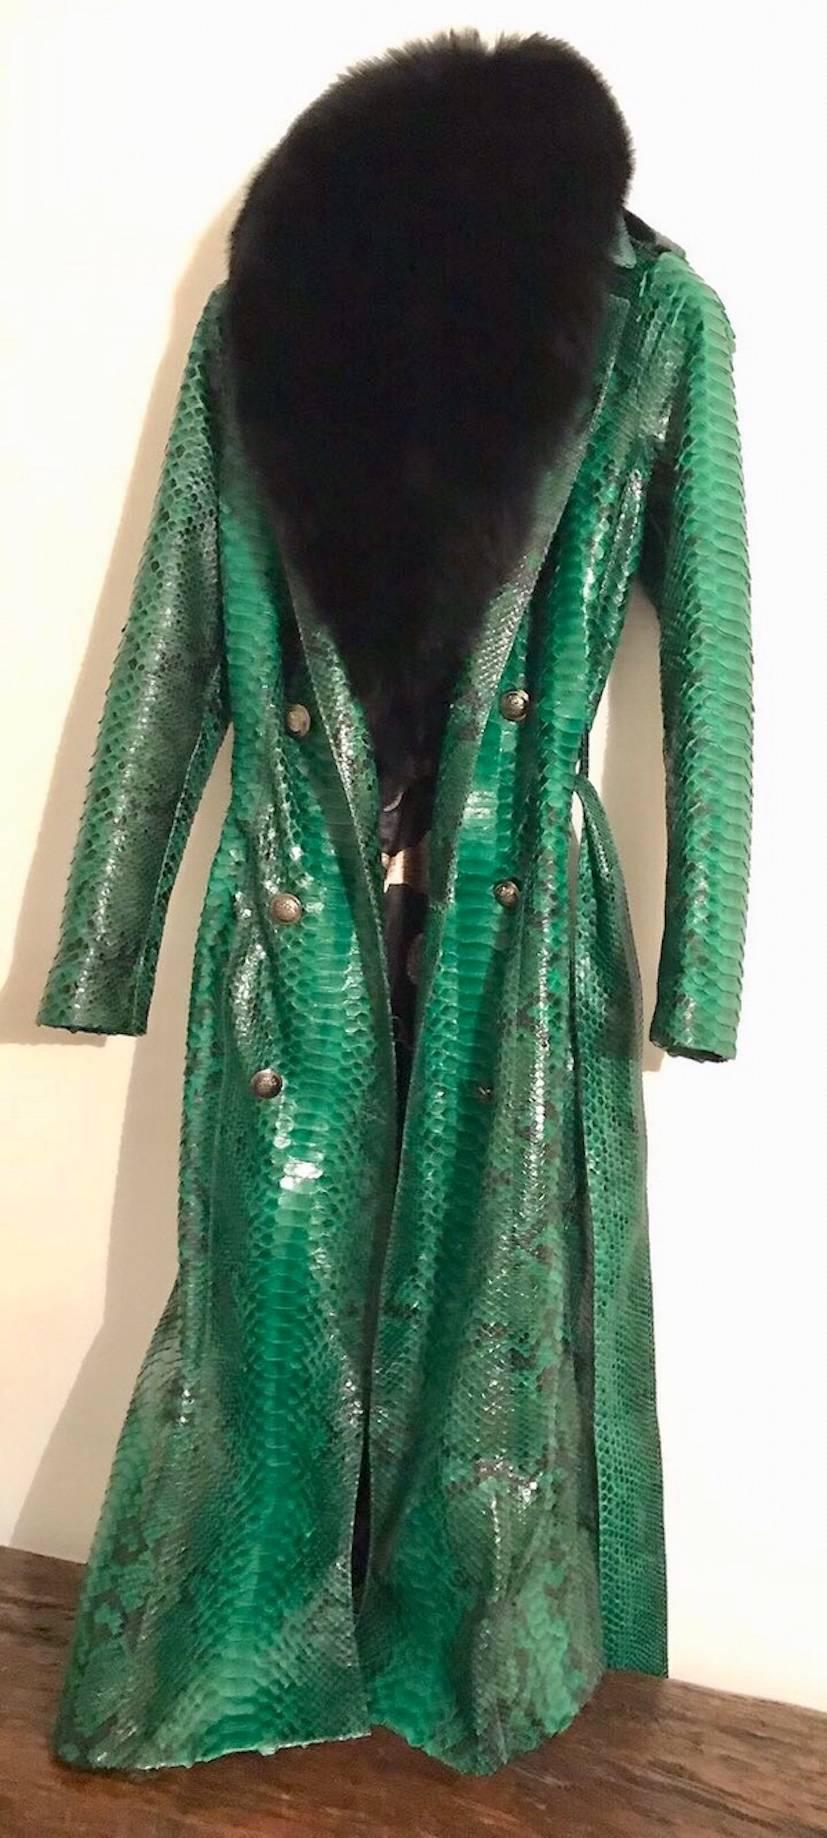 Ana Switzerland new Brand Green Python long coat to knees, Medium size with detachable Fox collar, two split at the back and military gun metal buttons. Can order Black, Grey, Natural Black White, baby pink, Emerald green and Blue colors.